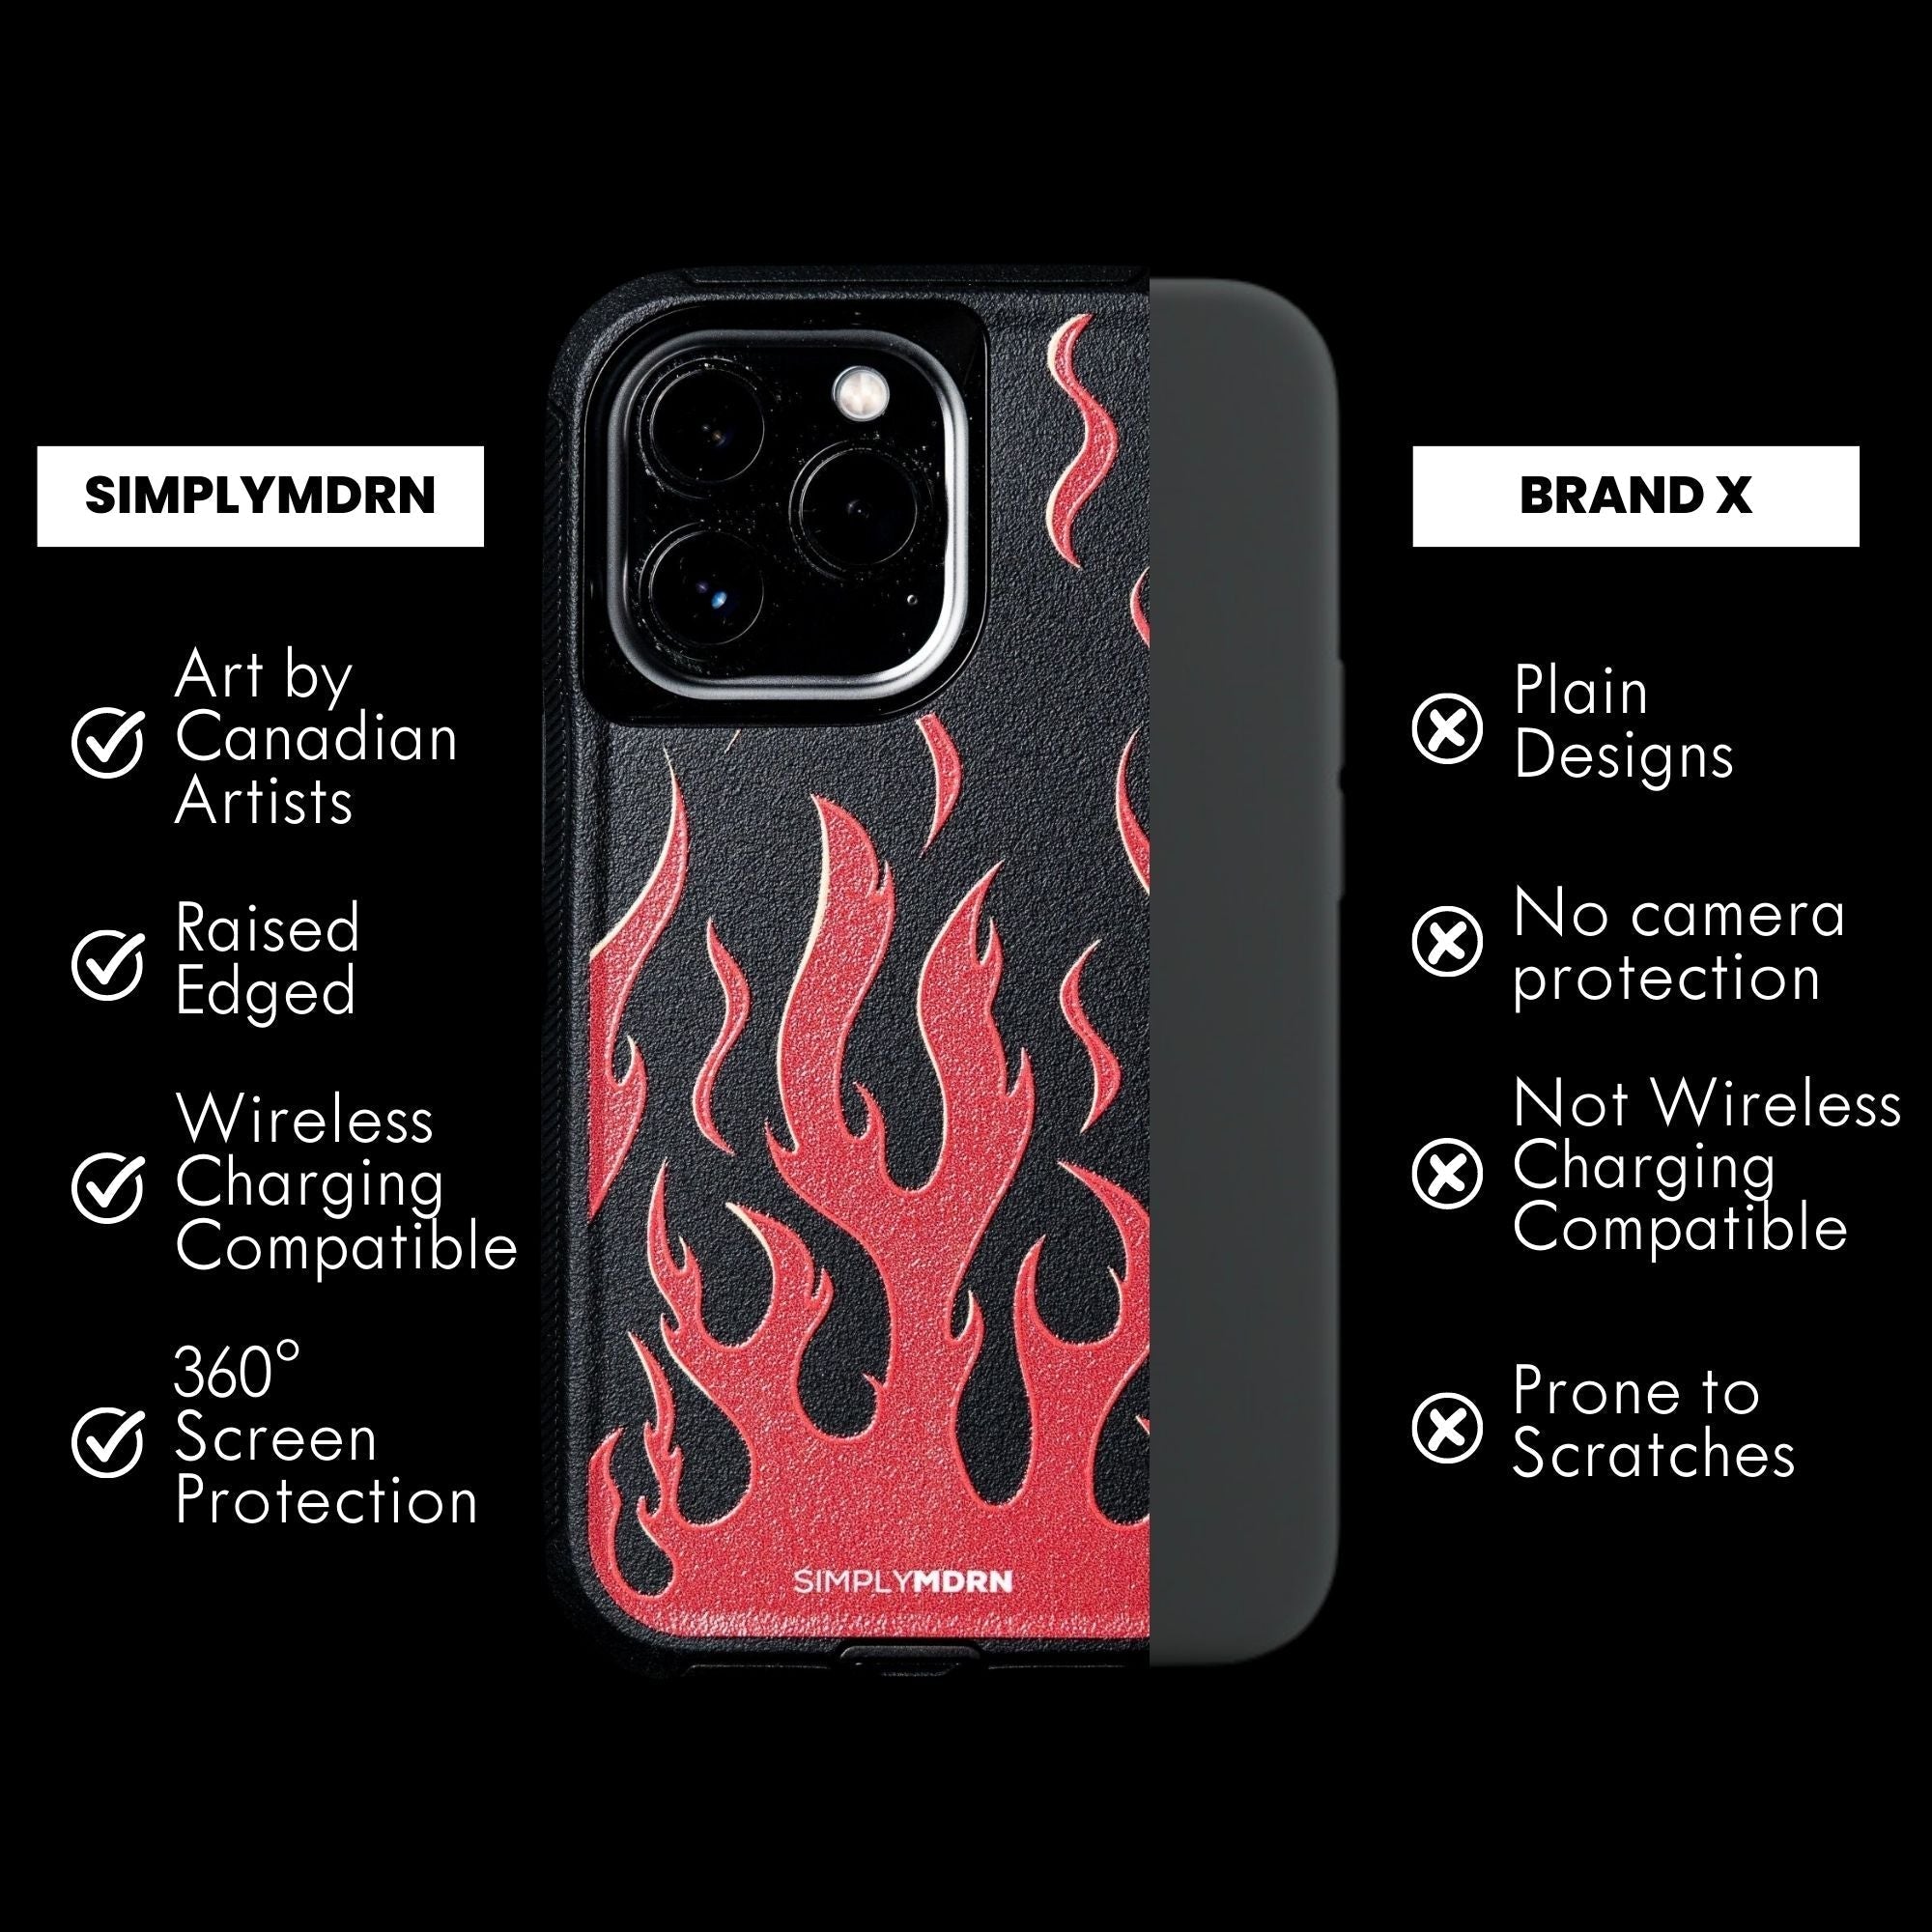 FLAMEZ ARMORED iPhone Case